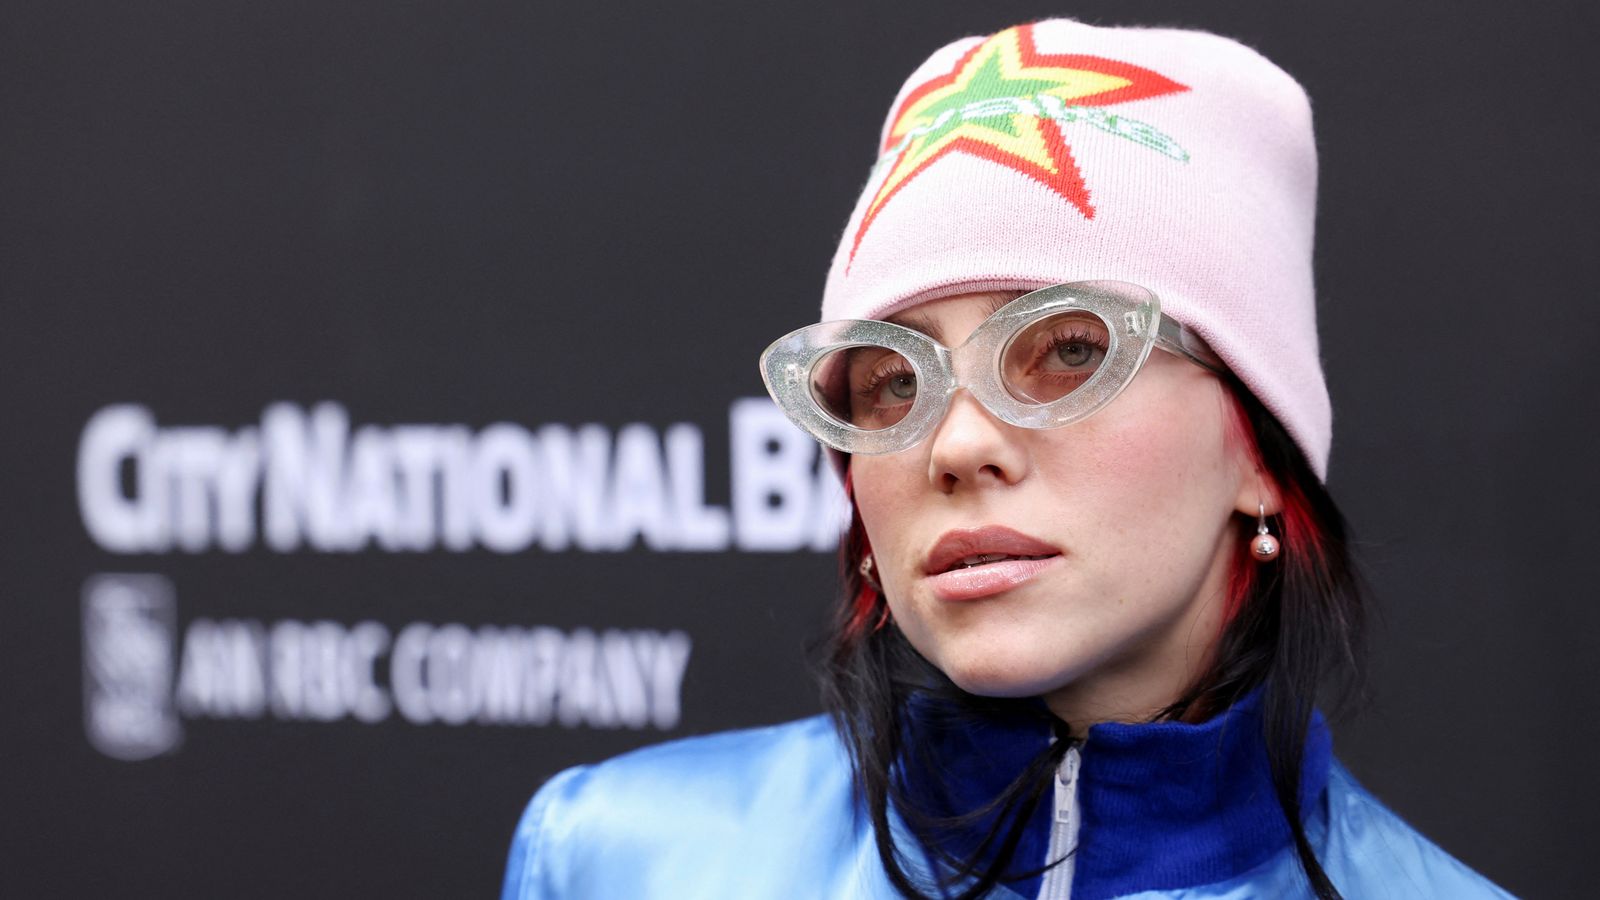 Billie Eilish Singer says she was outed in red carpet interview by